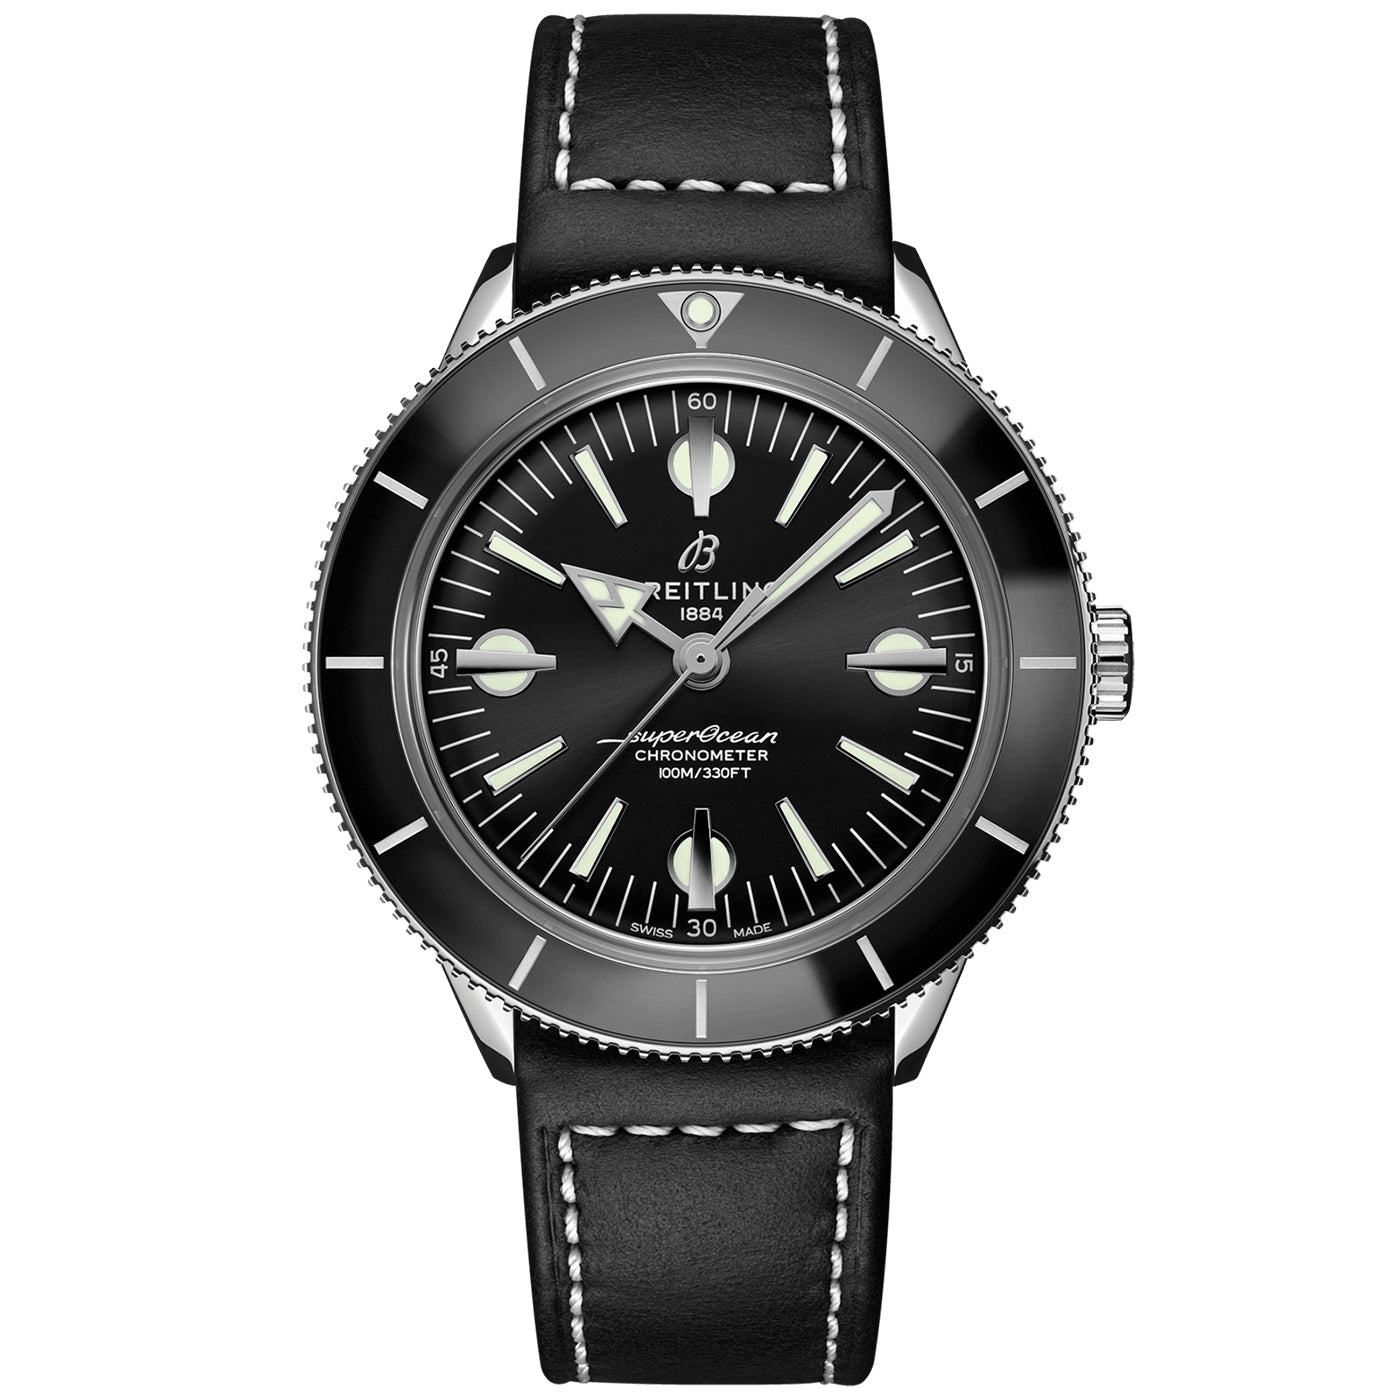 Superocean Heritage 57' 42mm Black Dial Leather Strap Watch